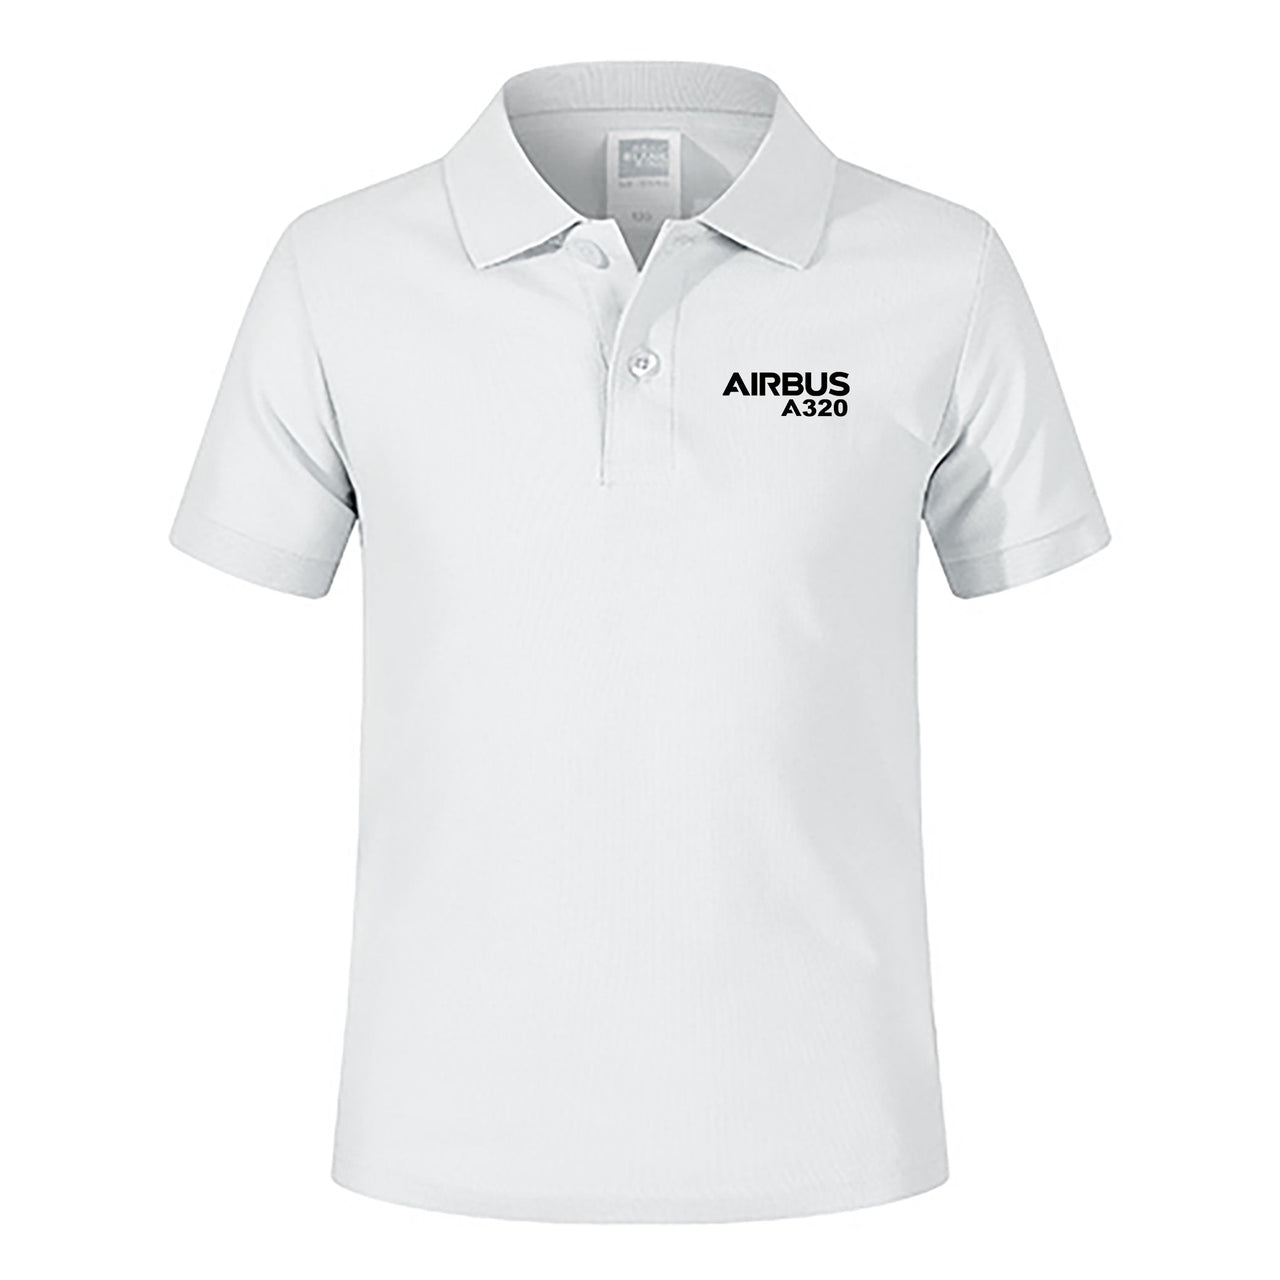 Airbus A320 & Text Designed Children Polo T-Shirts